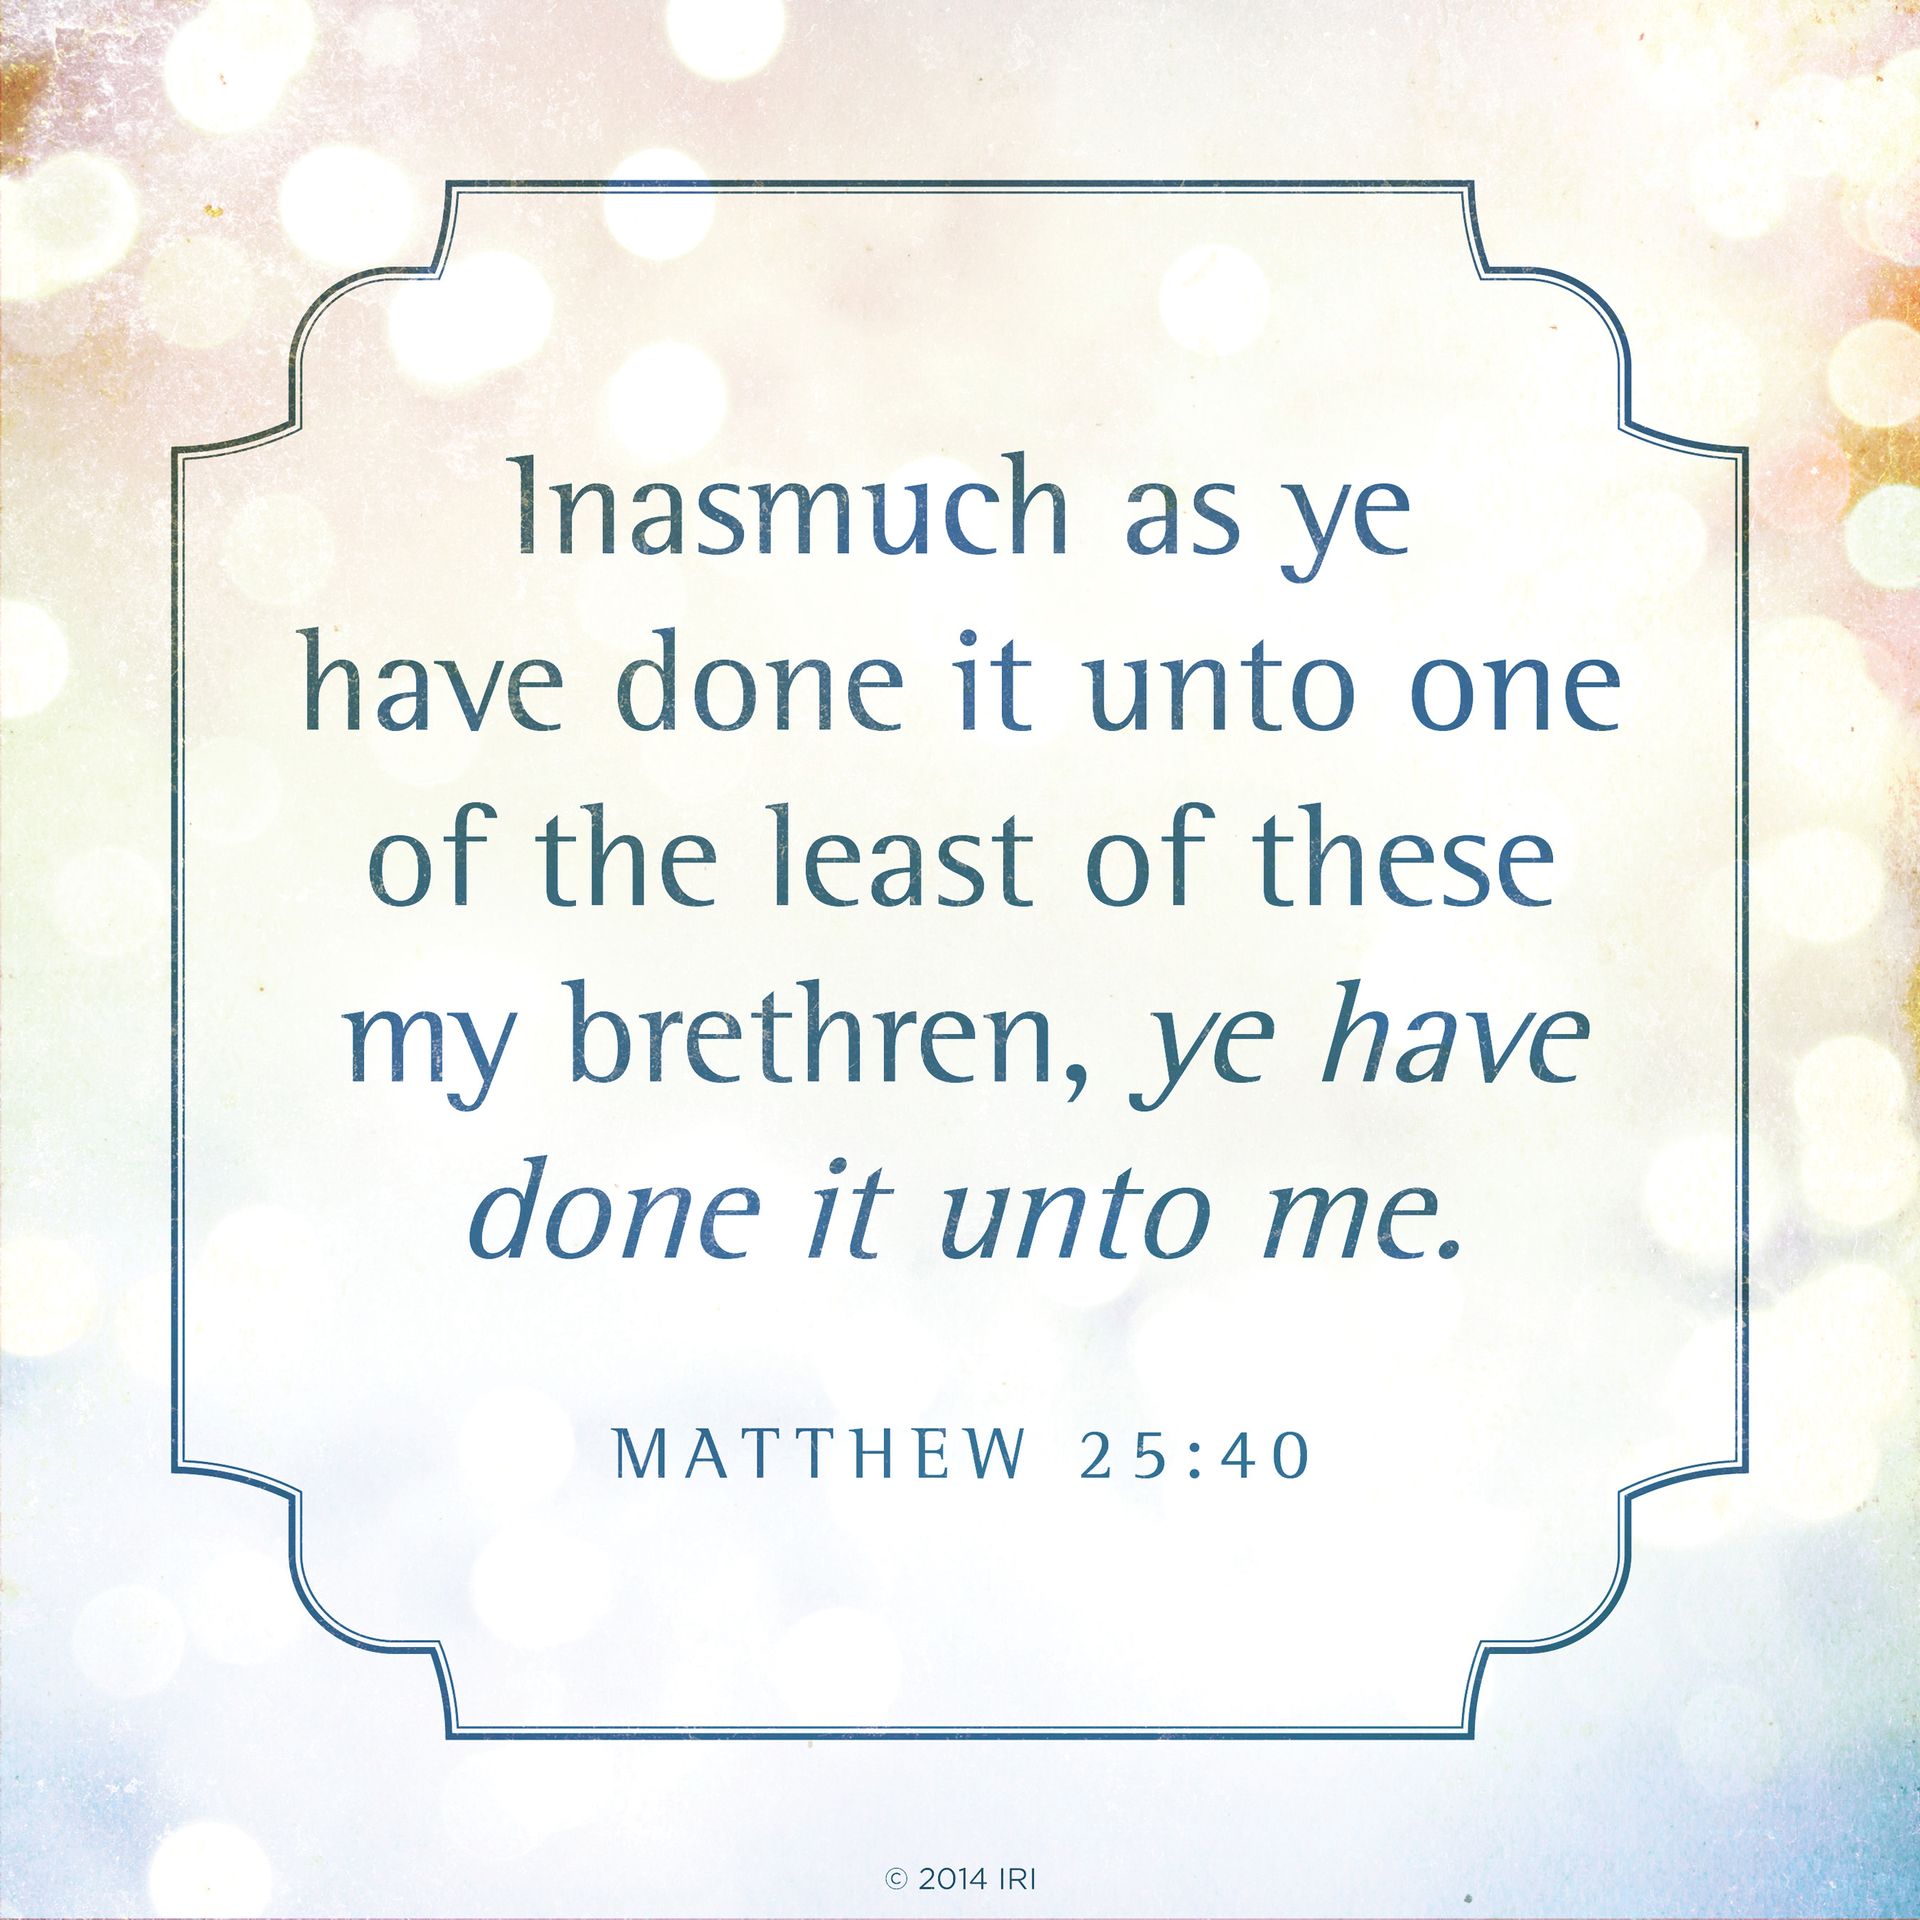 “Inasmuch as ye have done it unto one of the least of these my brethren, ye have done it unto me.”—Matthew 25:40